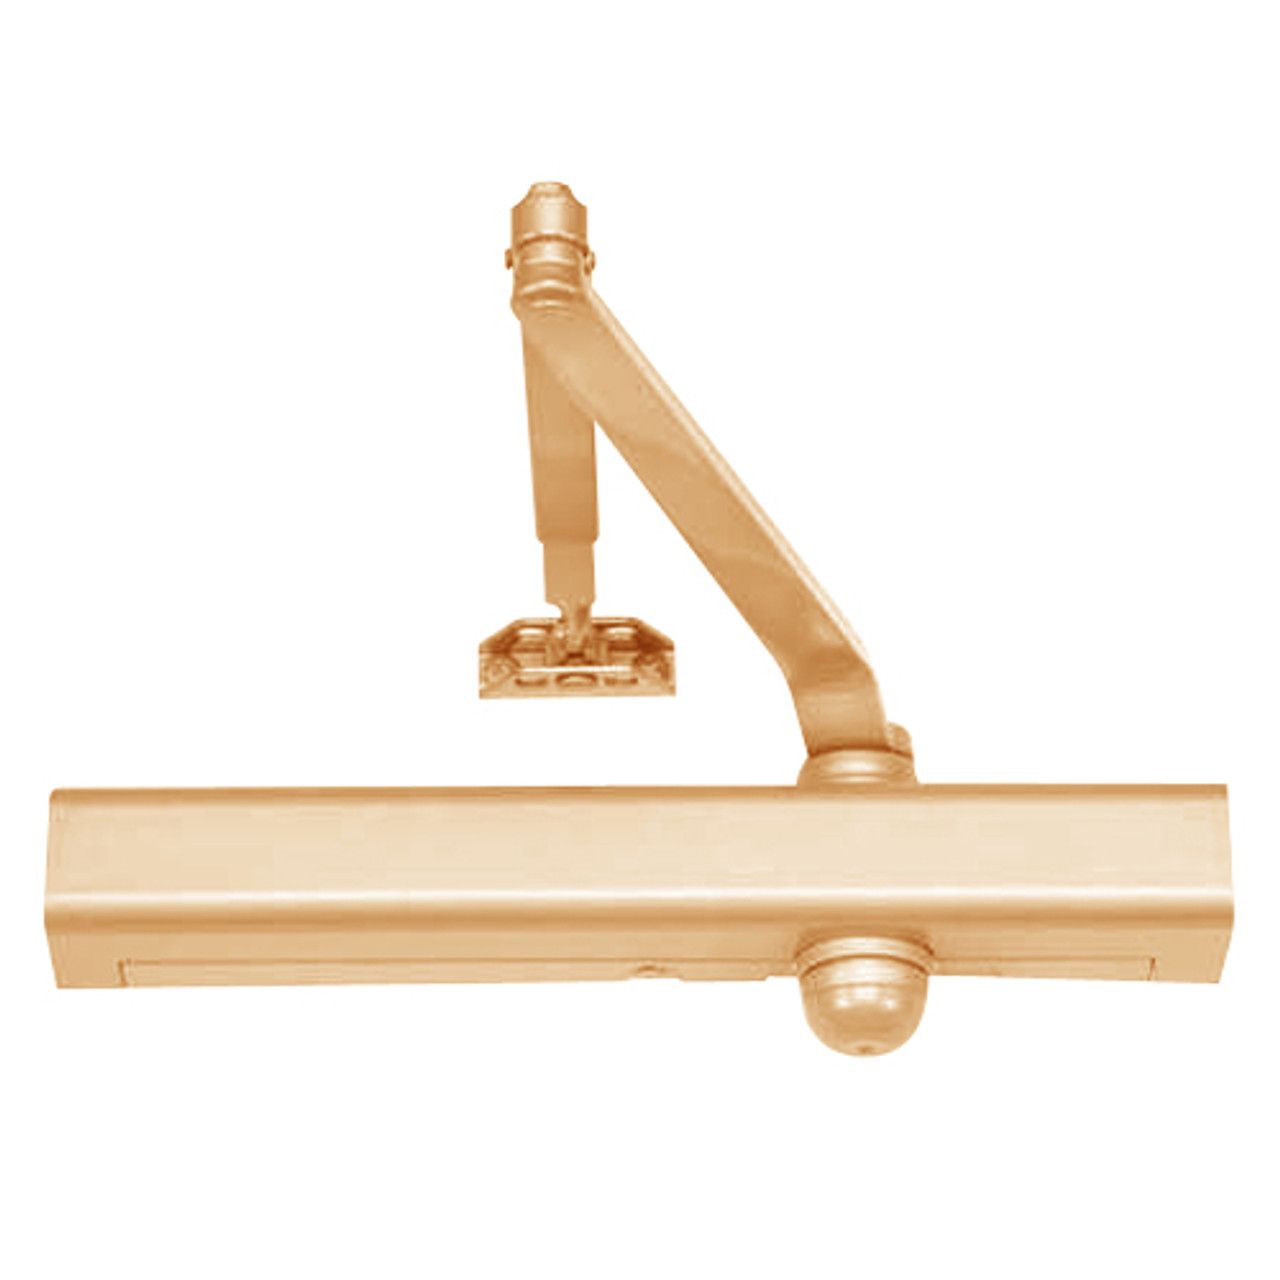 3301-691 Yale 3000 Series Architectural Door Closer with Regular Parallel and Top Jamb to 3" Reveal in Light Bronze